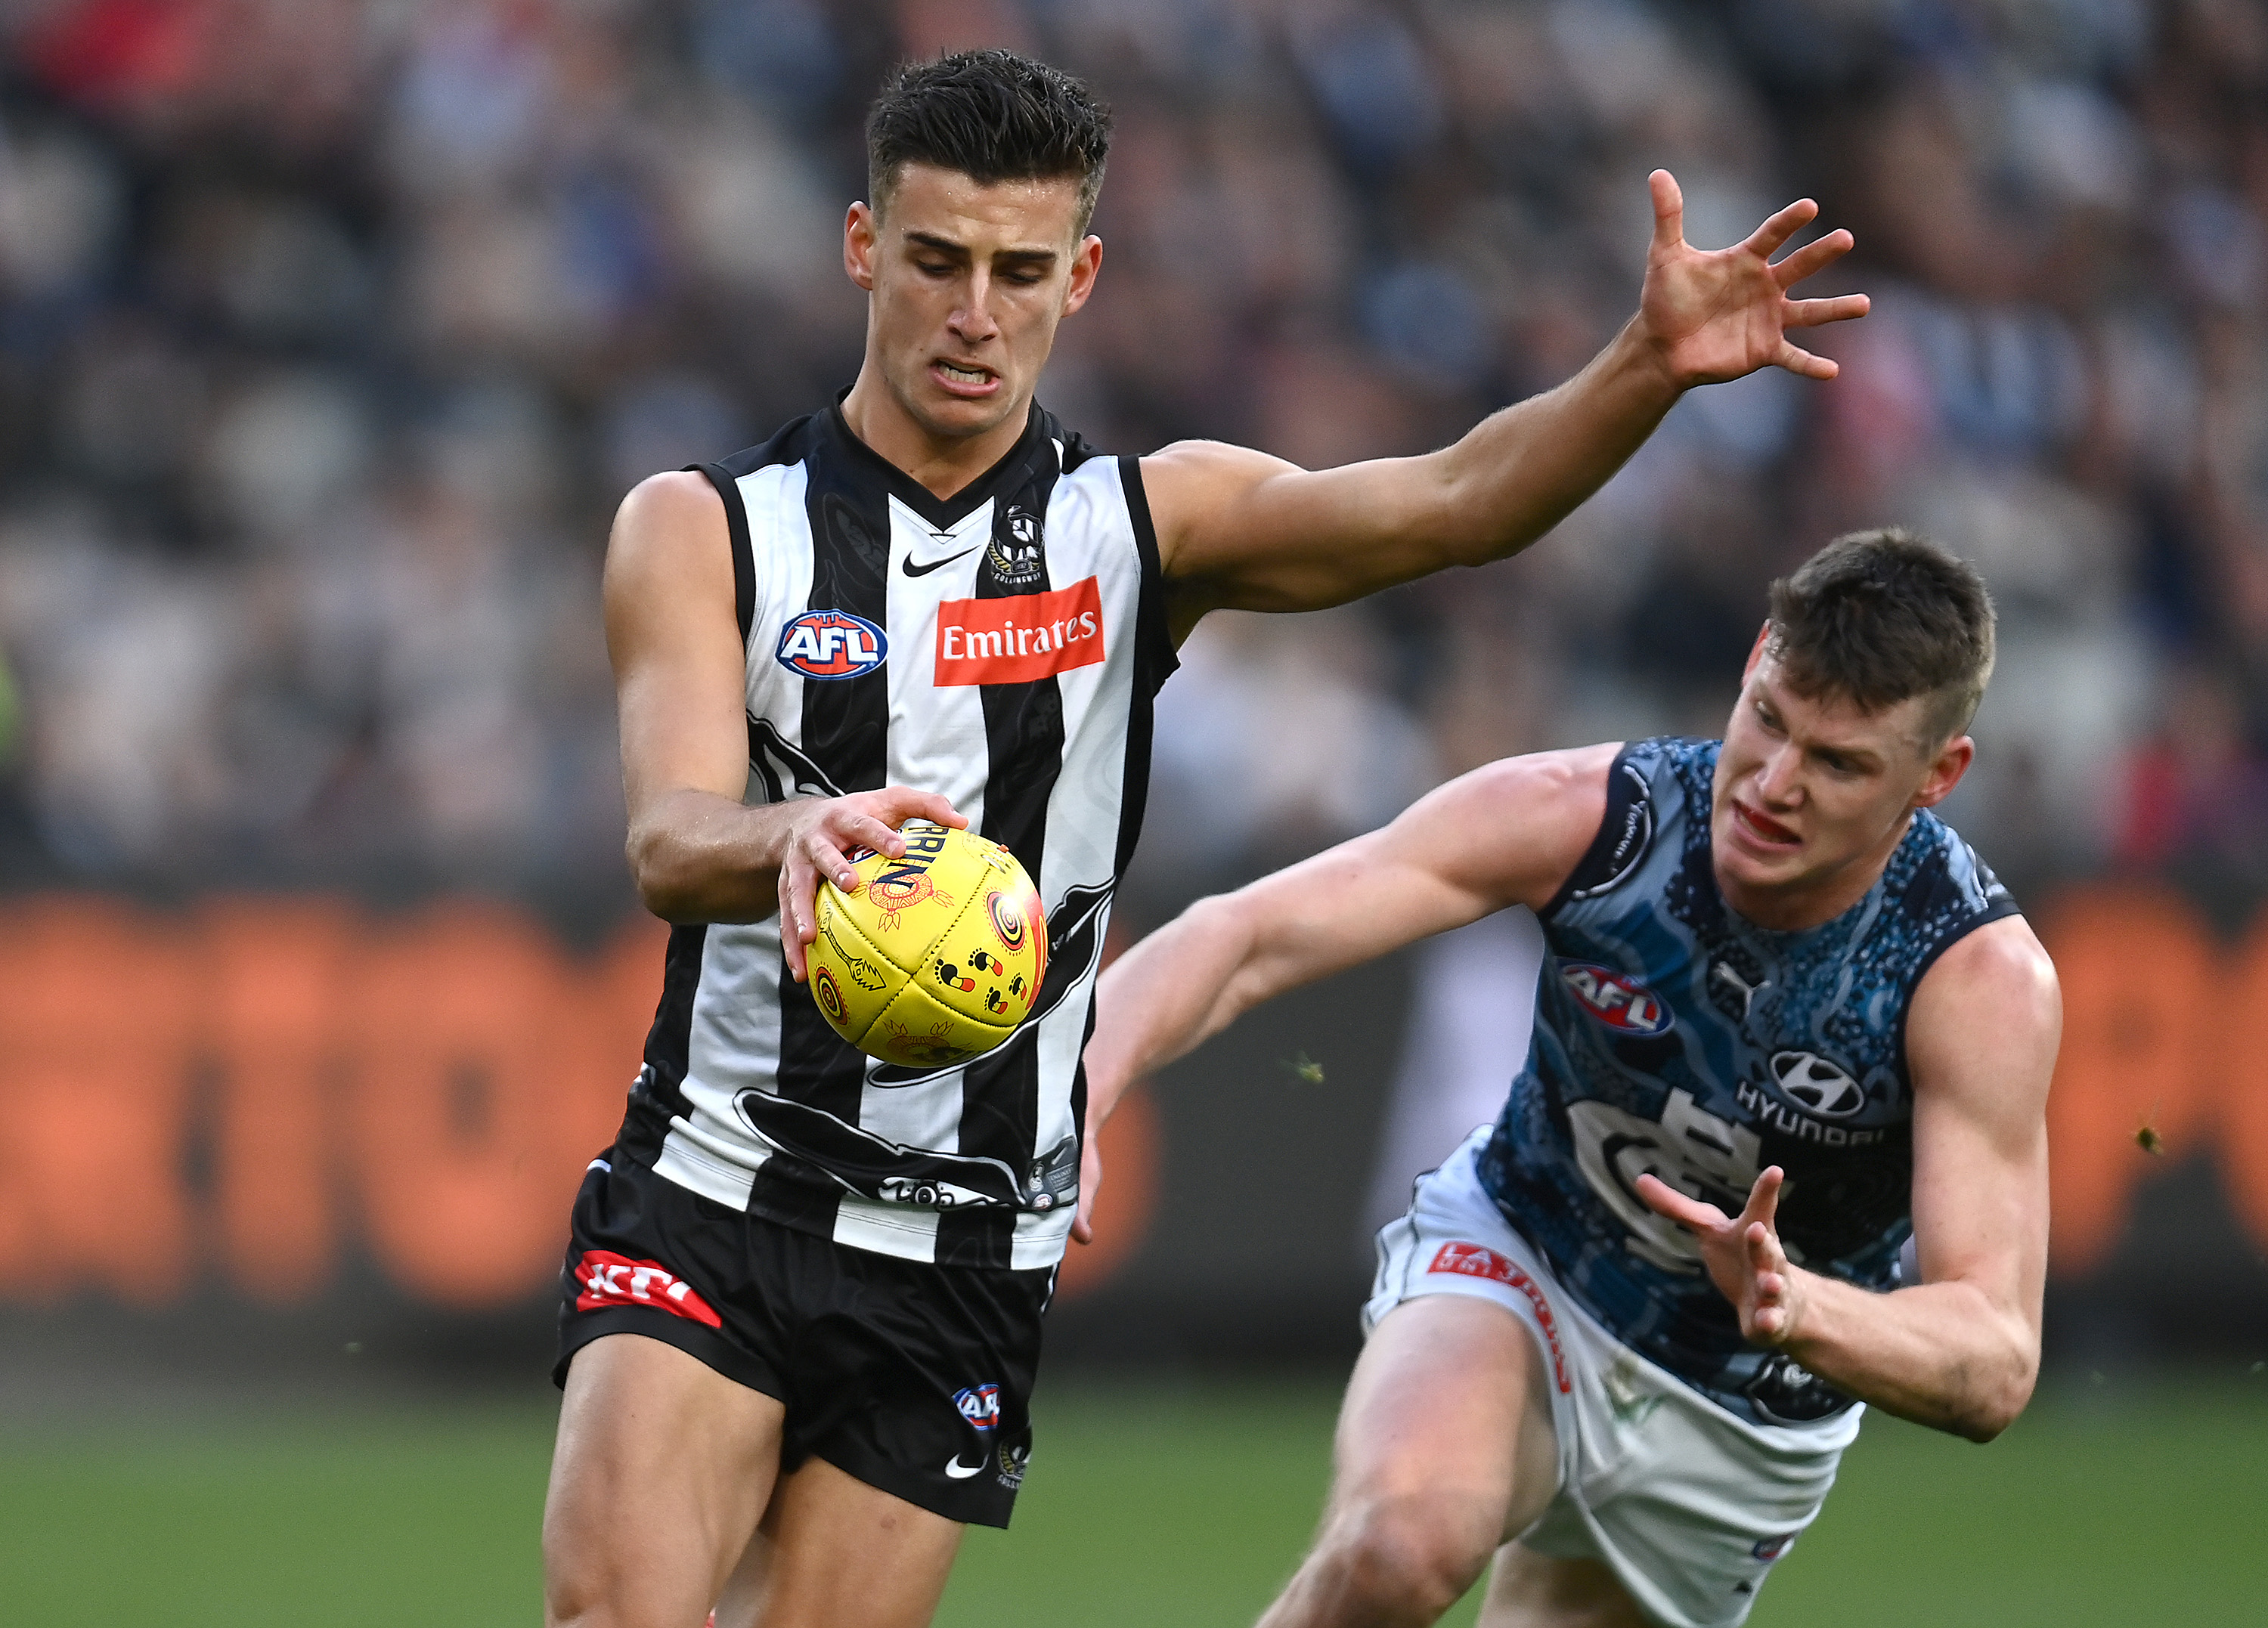 Nick Daicos kicks whilst being tackled by rival Sam Walsh.